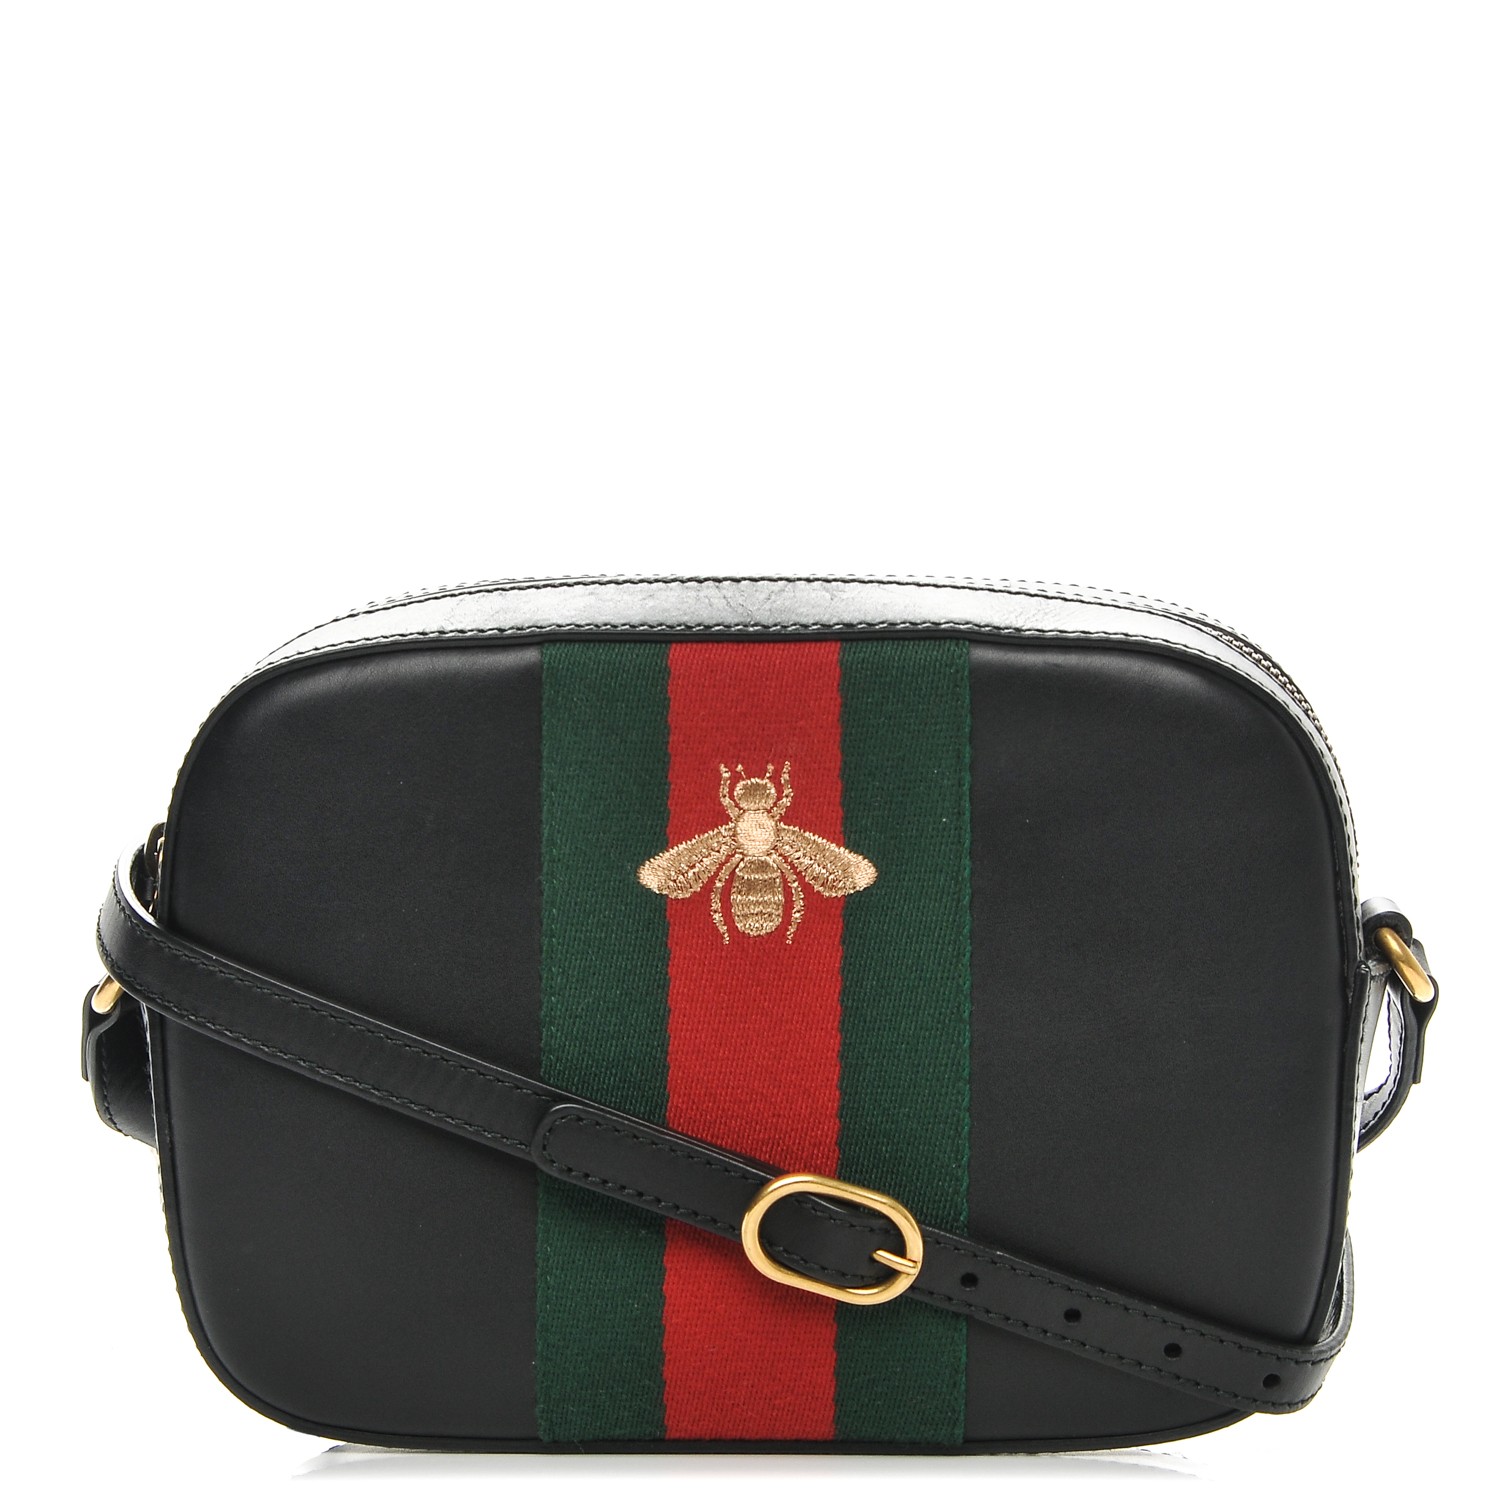 black gucci purse with bee